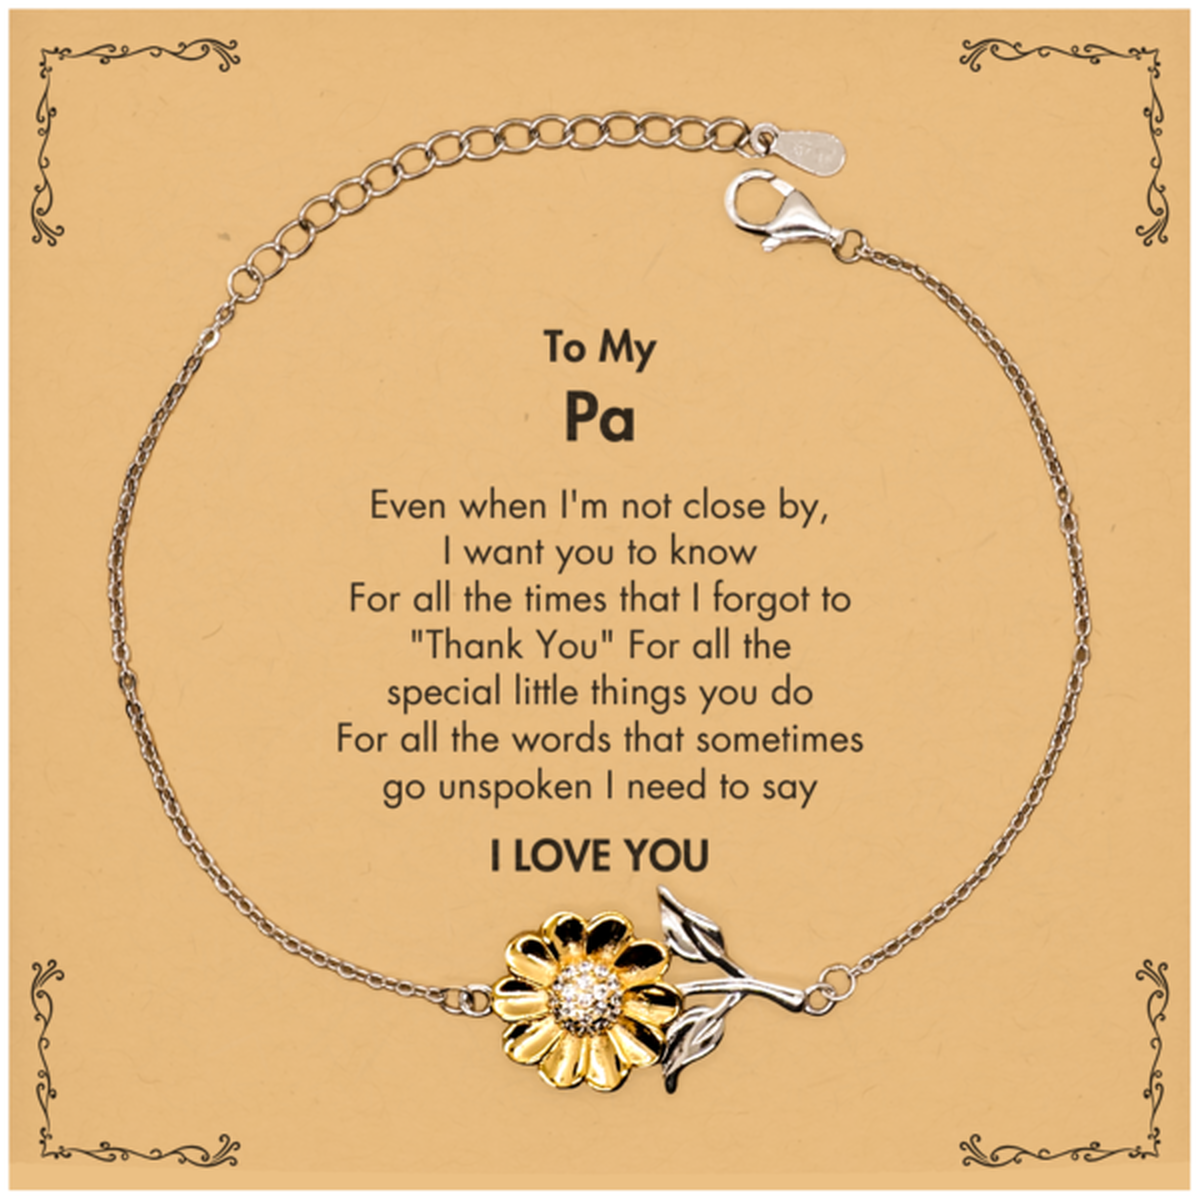 Thank You Gifts for Pa, Keepsake Sunflower Bracelet Gifts for Pa Birthday Mother's day Father's Day Pa For all the words That sometimes go unspoken I need to say I LOVE YOU